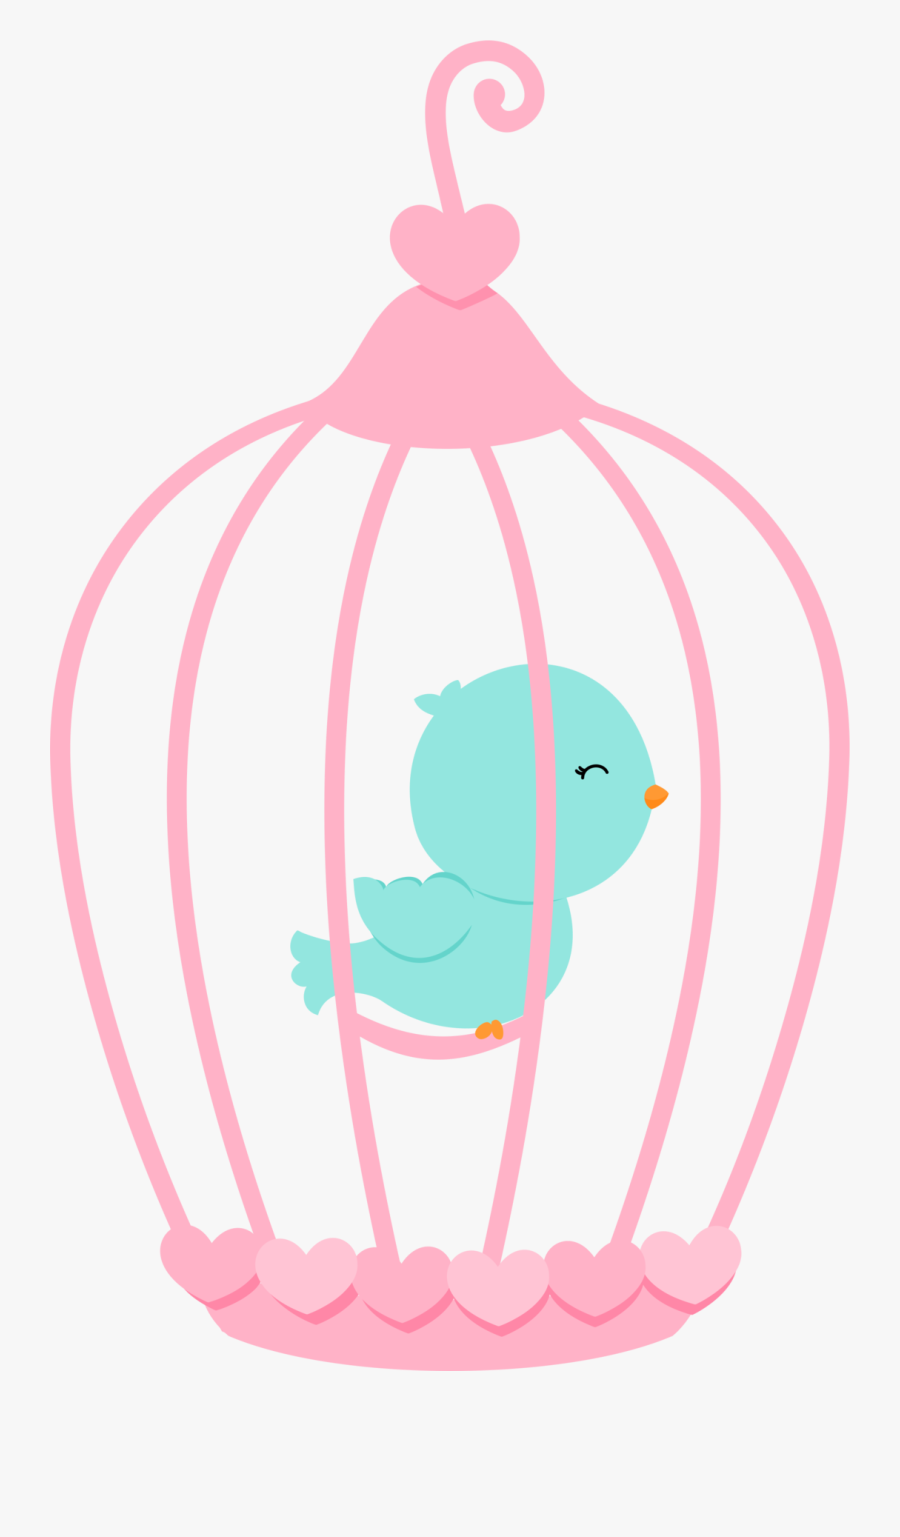 Free Machine Embroidery Designs, Love Birds, Bird Cages, - Bird In A Cage Clipart, Transparent Clipart